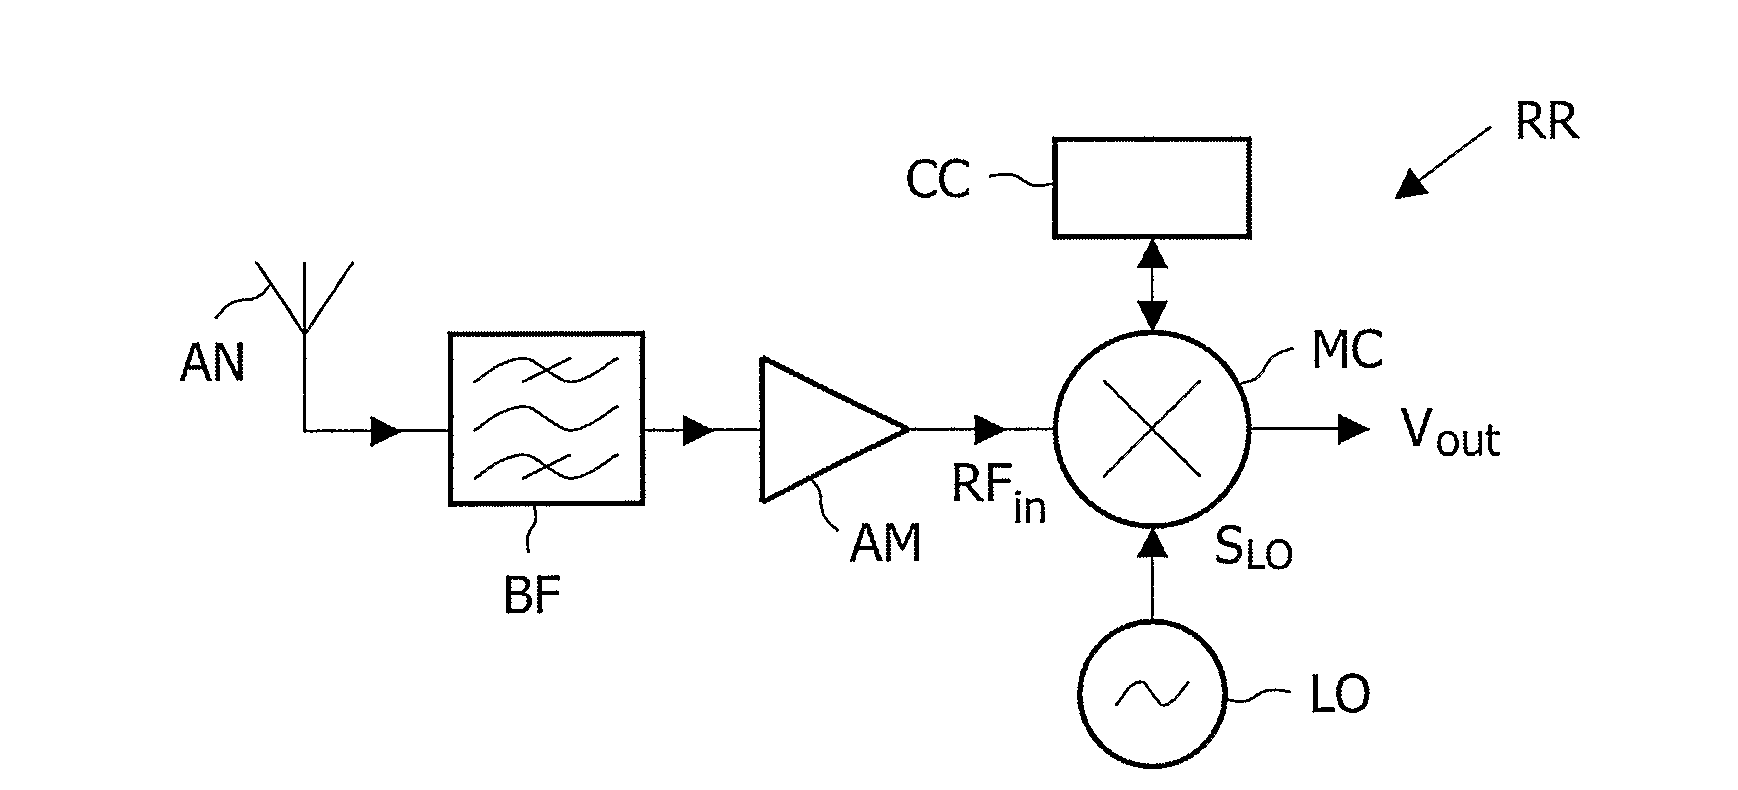 Balanced Mixer With Calibration of Load Impedances